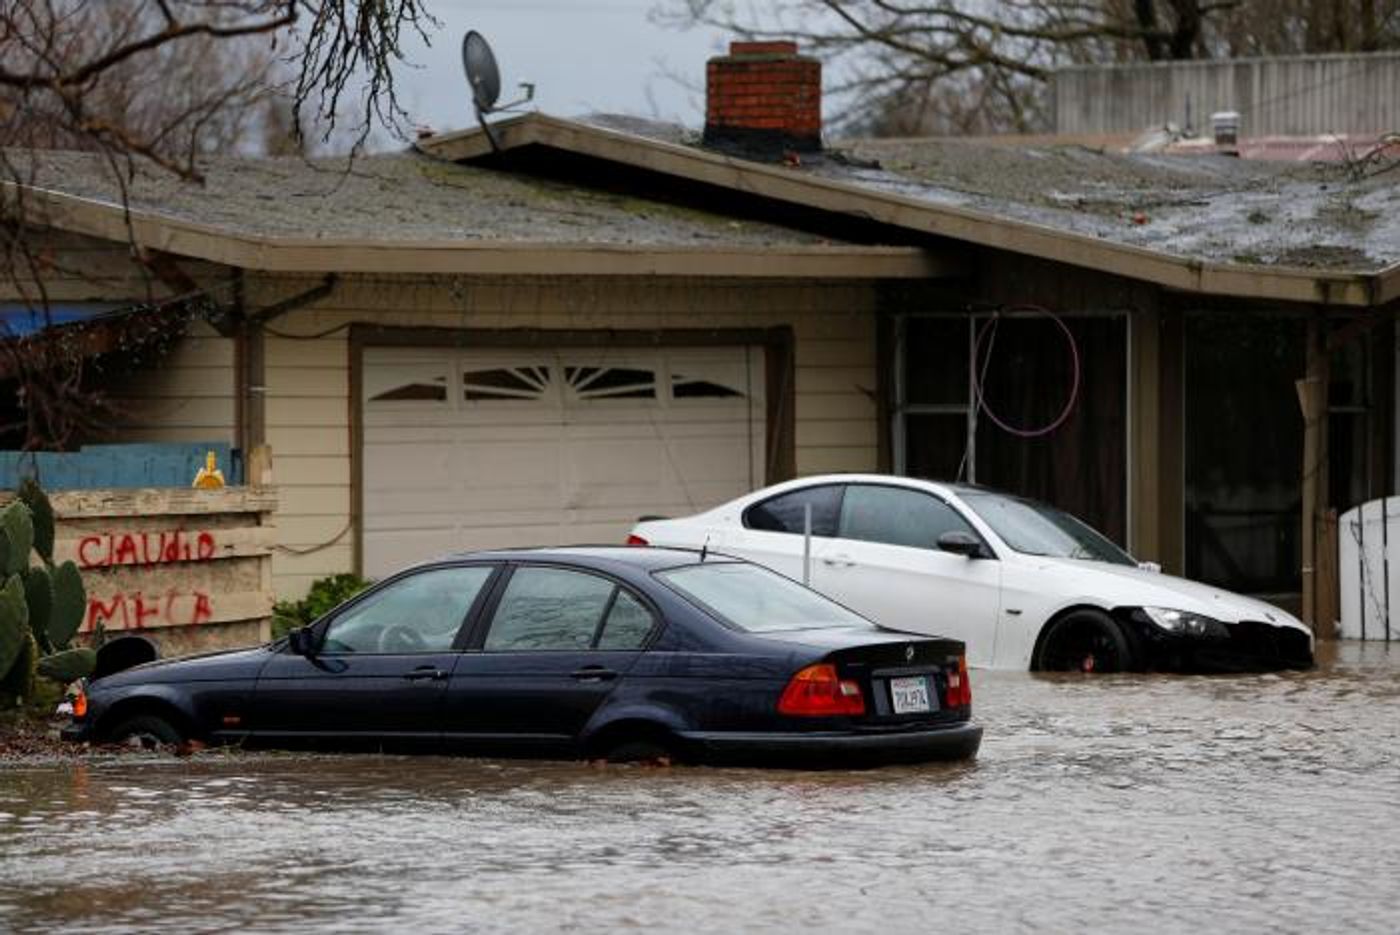 A partially submerged home and vehicles are seen during a winter storm in Petaluma, California, January 8, 2017. REUTERS/Stephen Lam